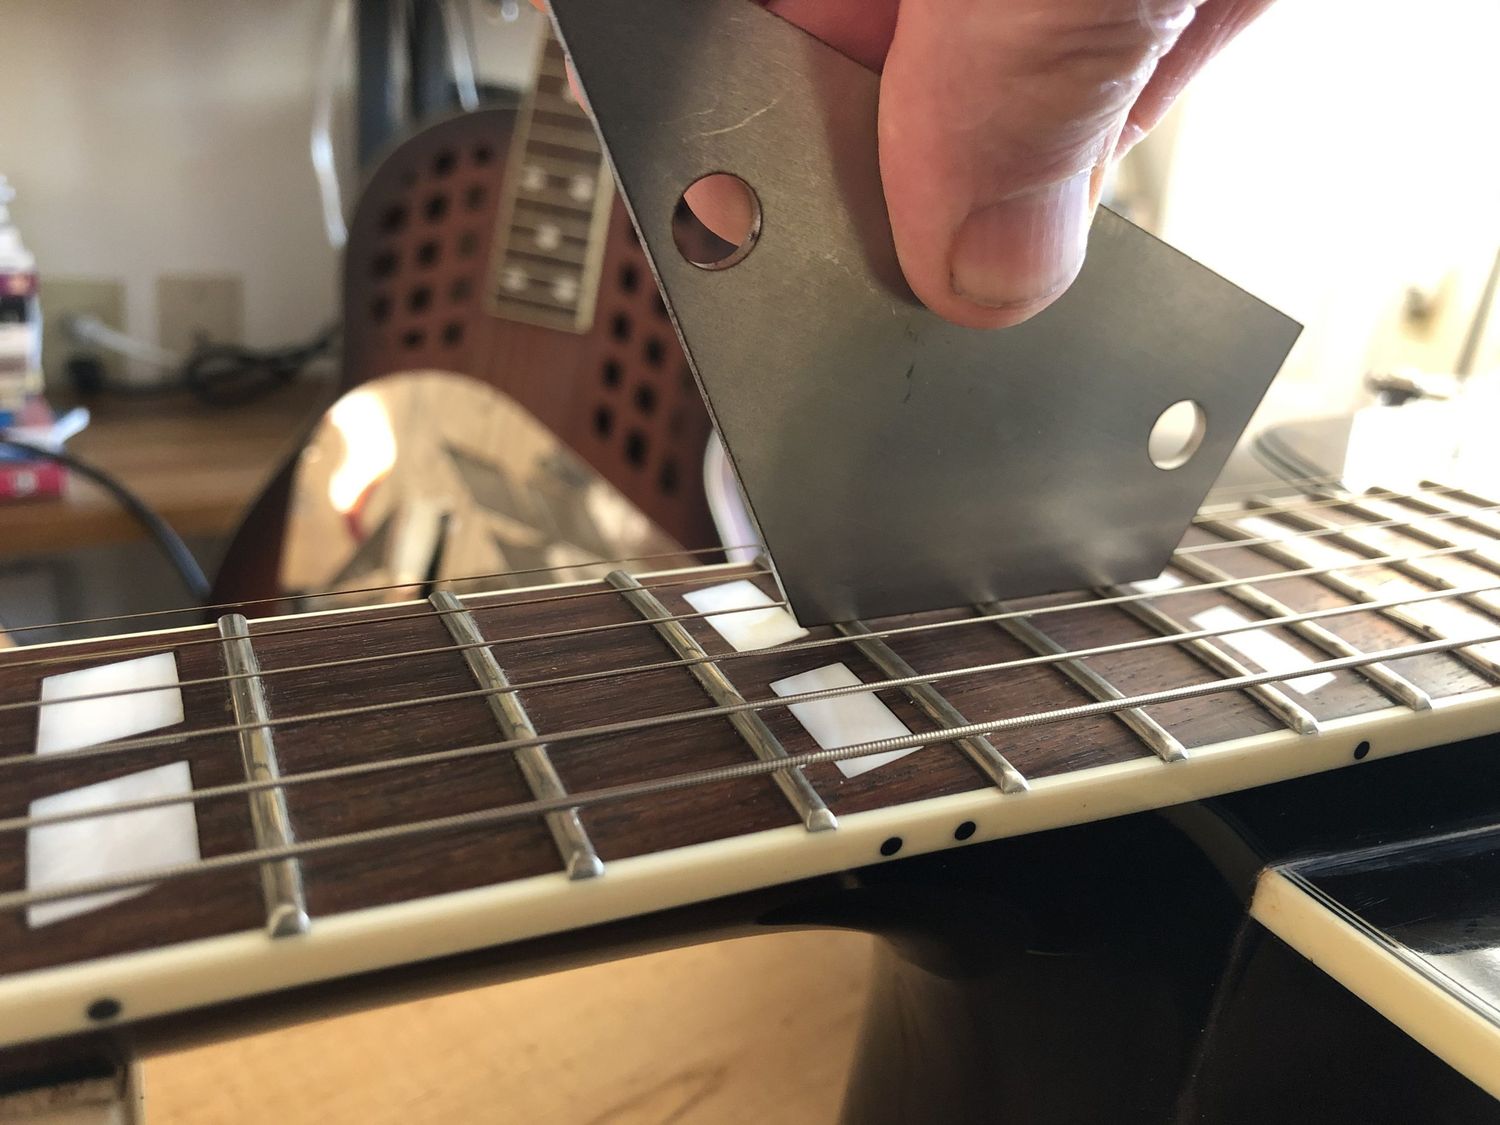 How To Fix Fret Buzz On Acoustic Guitar